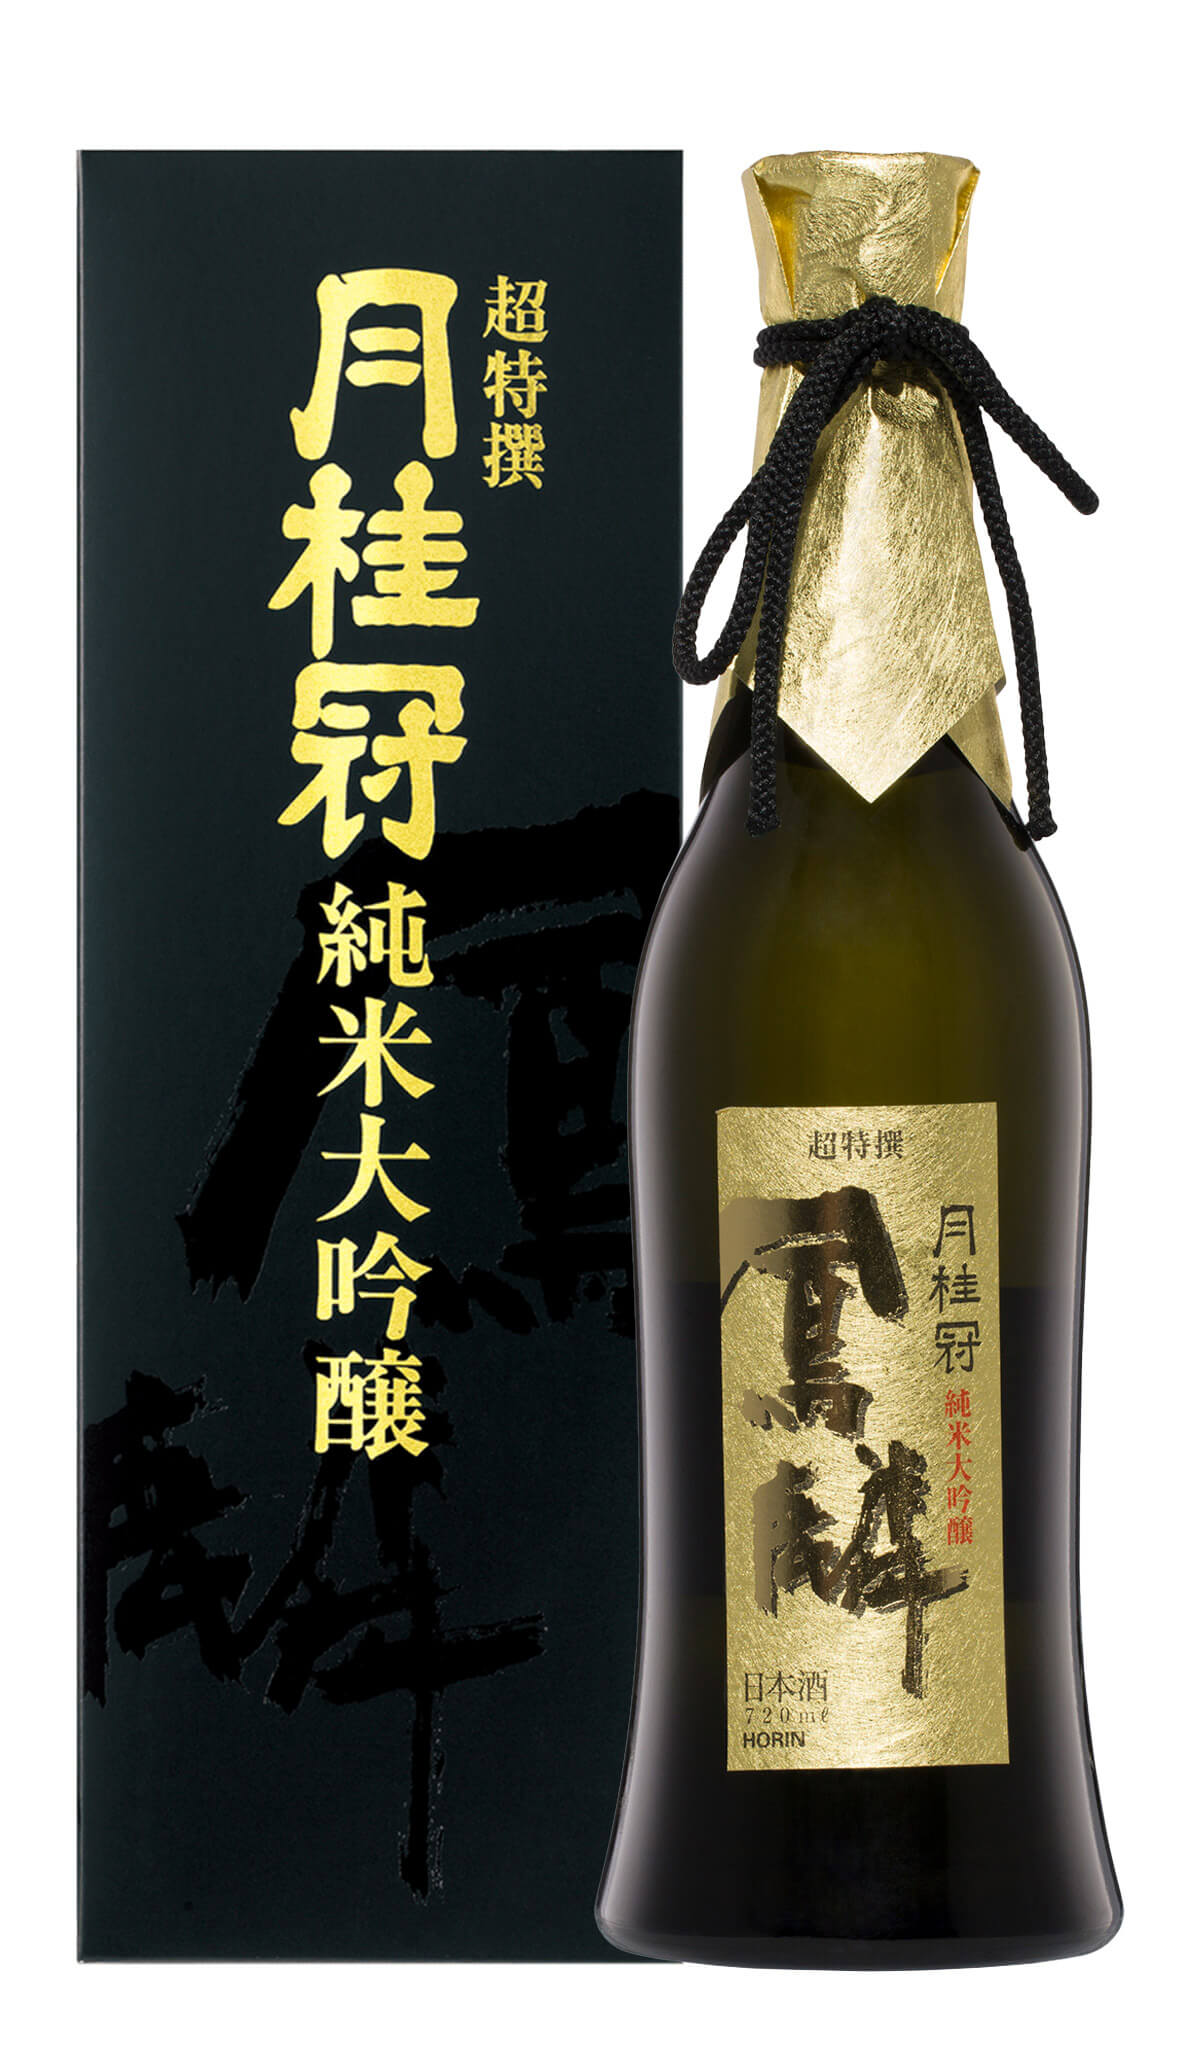 Find out more, explore the range and buy Gekkeikan Horin Junmai Daiginjo Sake 720mL available online at Wine Sellers Direct - Australia's independent liquor specialists.